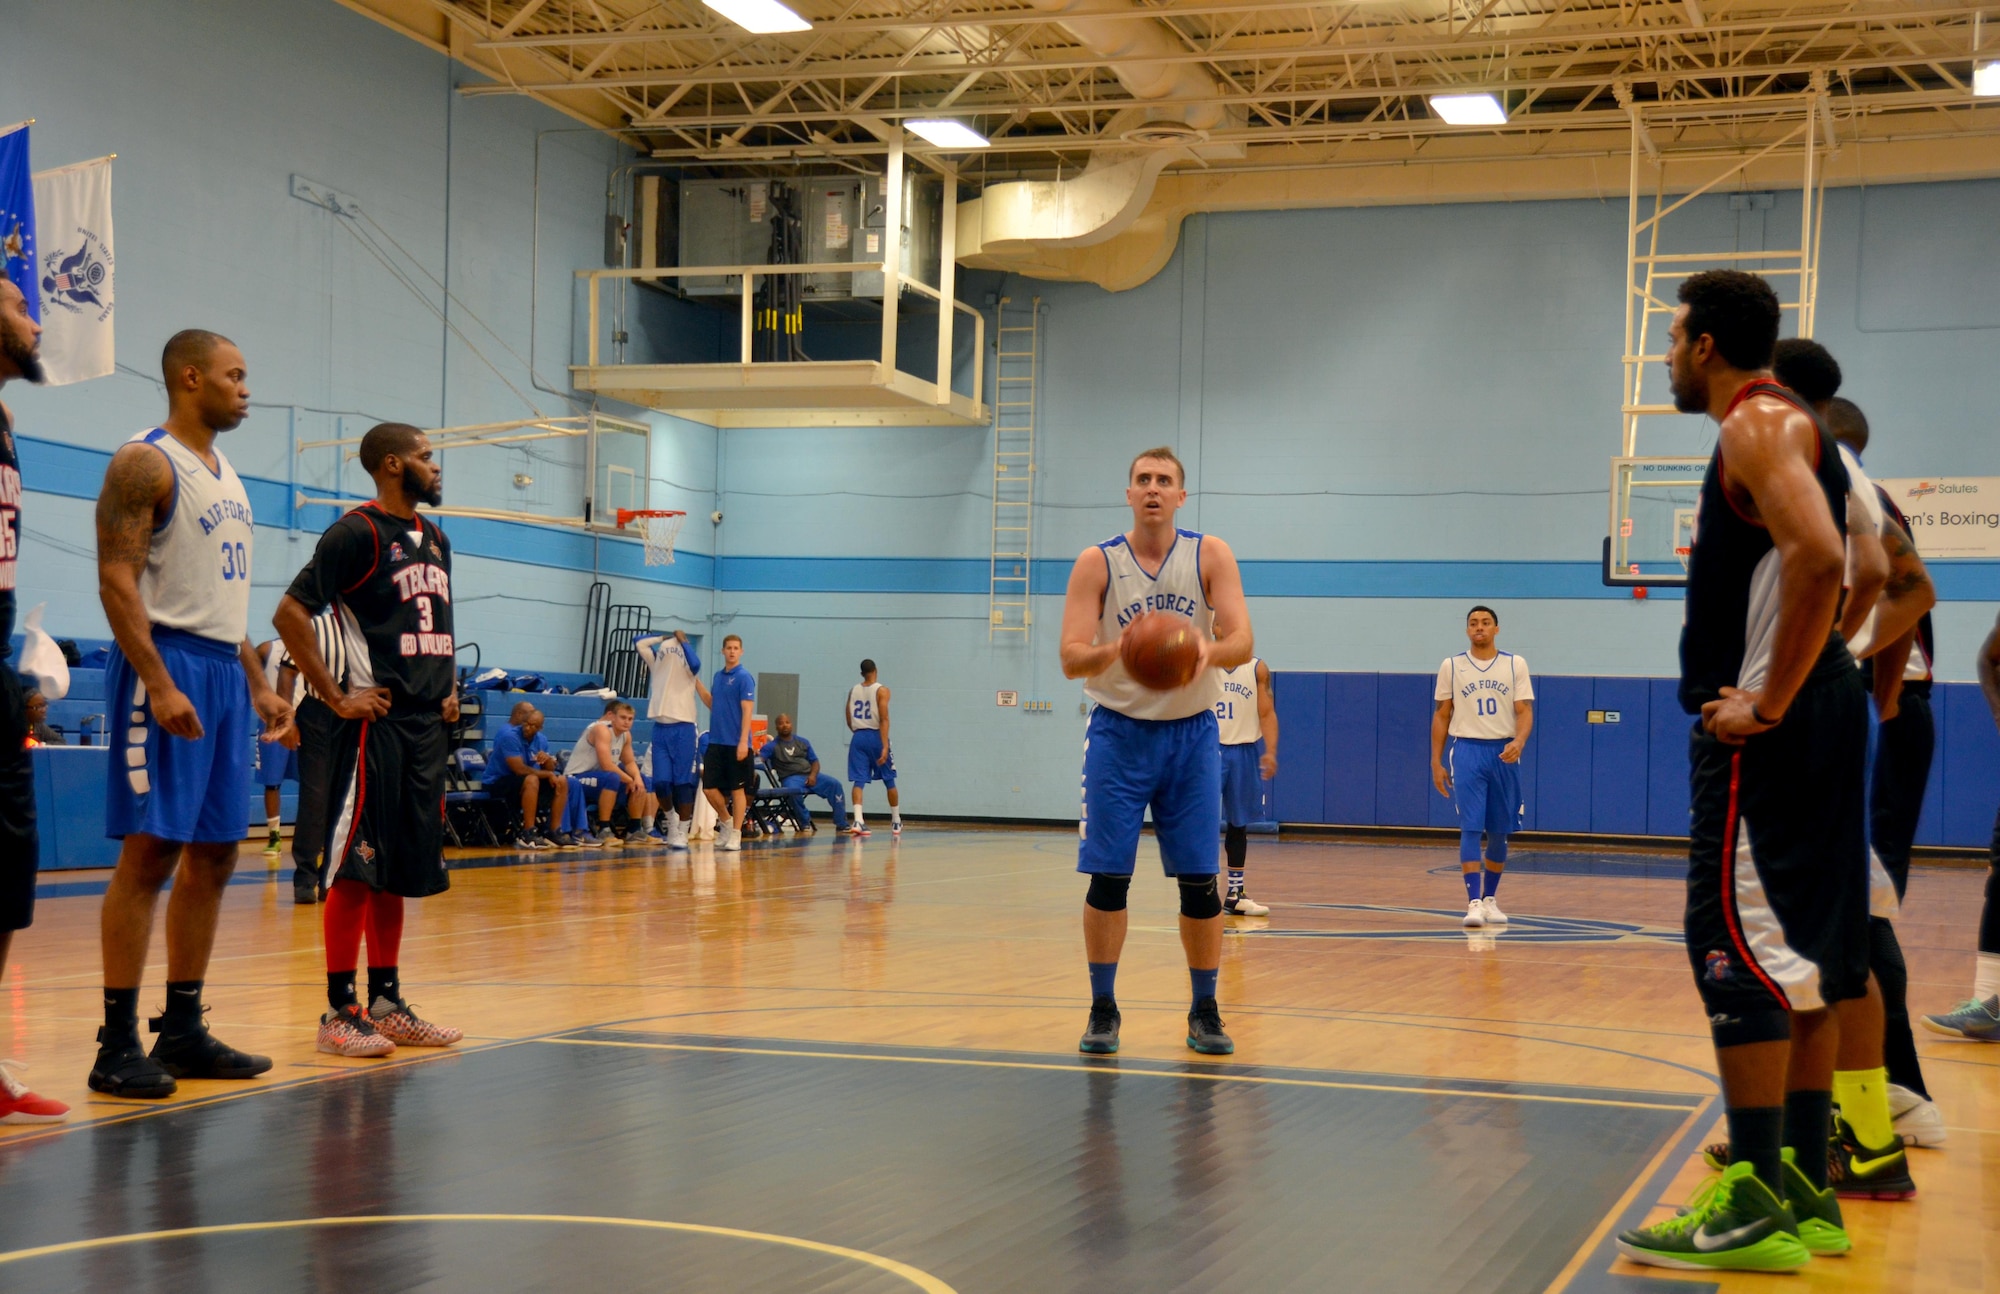 1st Lt. Michael Fitzgerald attempts to shoot a foul shot during the first half against the Texas Red Wolves at the Chaparral Fitness Center at JBSA-Lackland. (U.S. Air Force photo by Steve Warns)